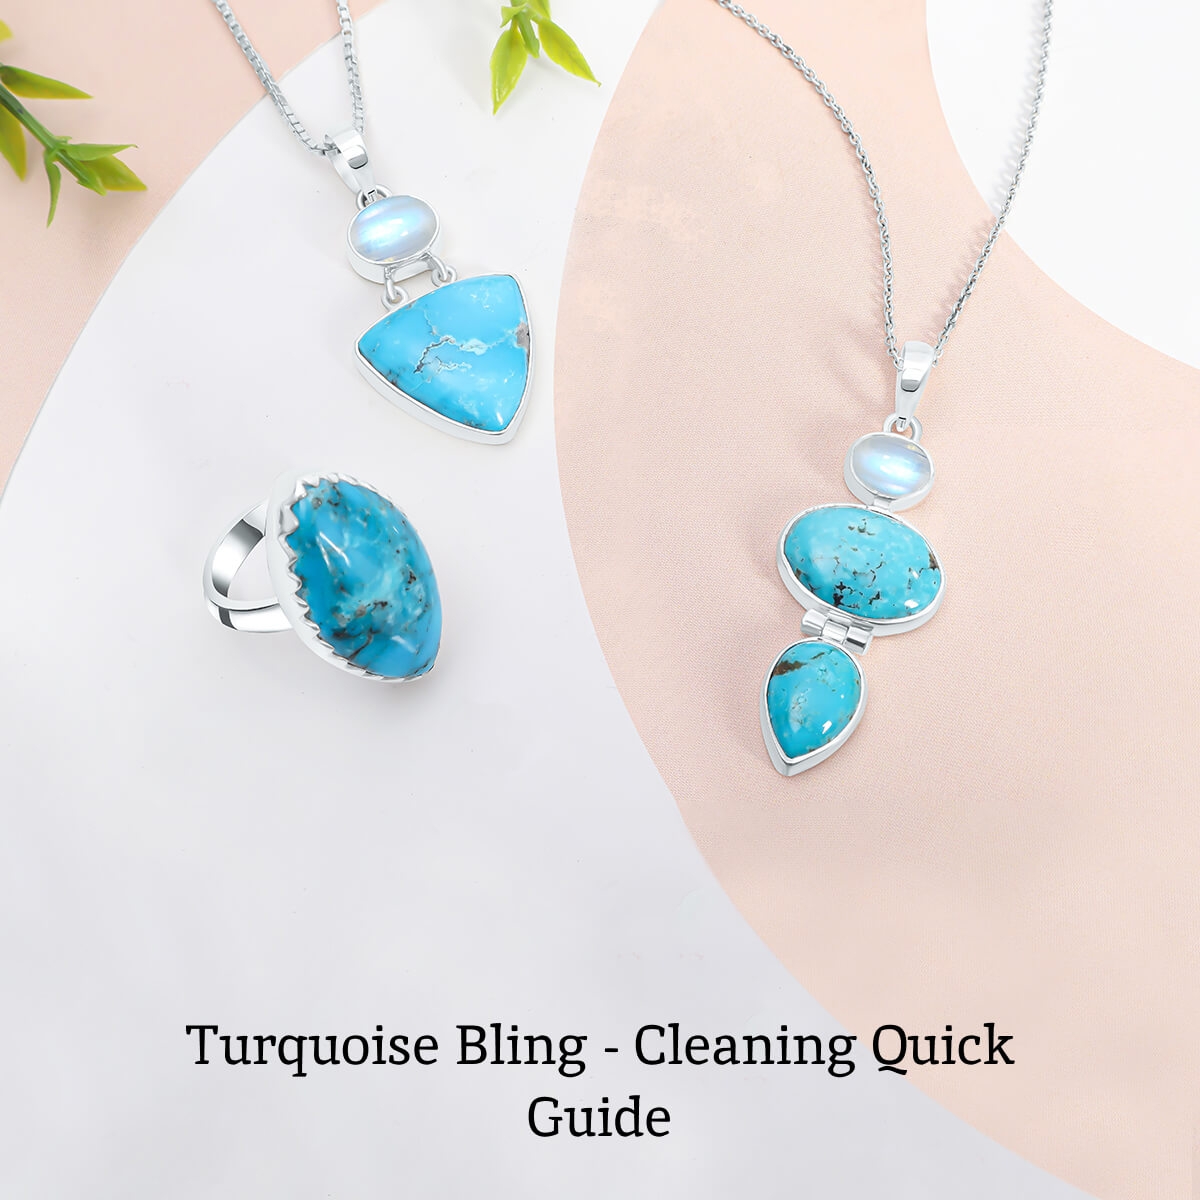 How to Clean Turquoise Jewelry